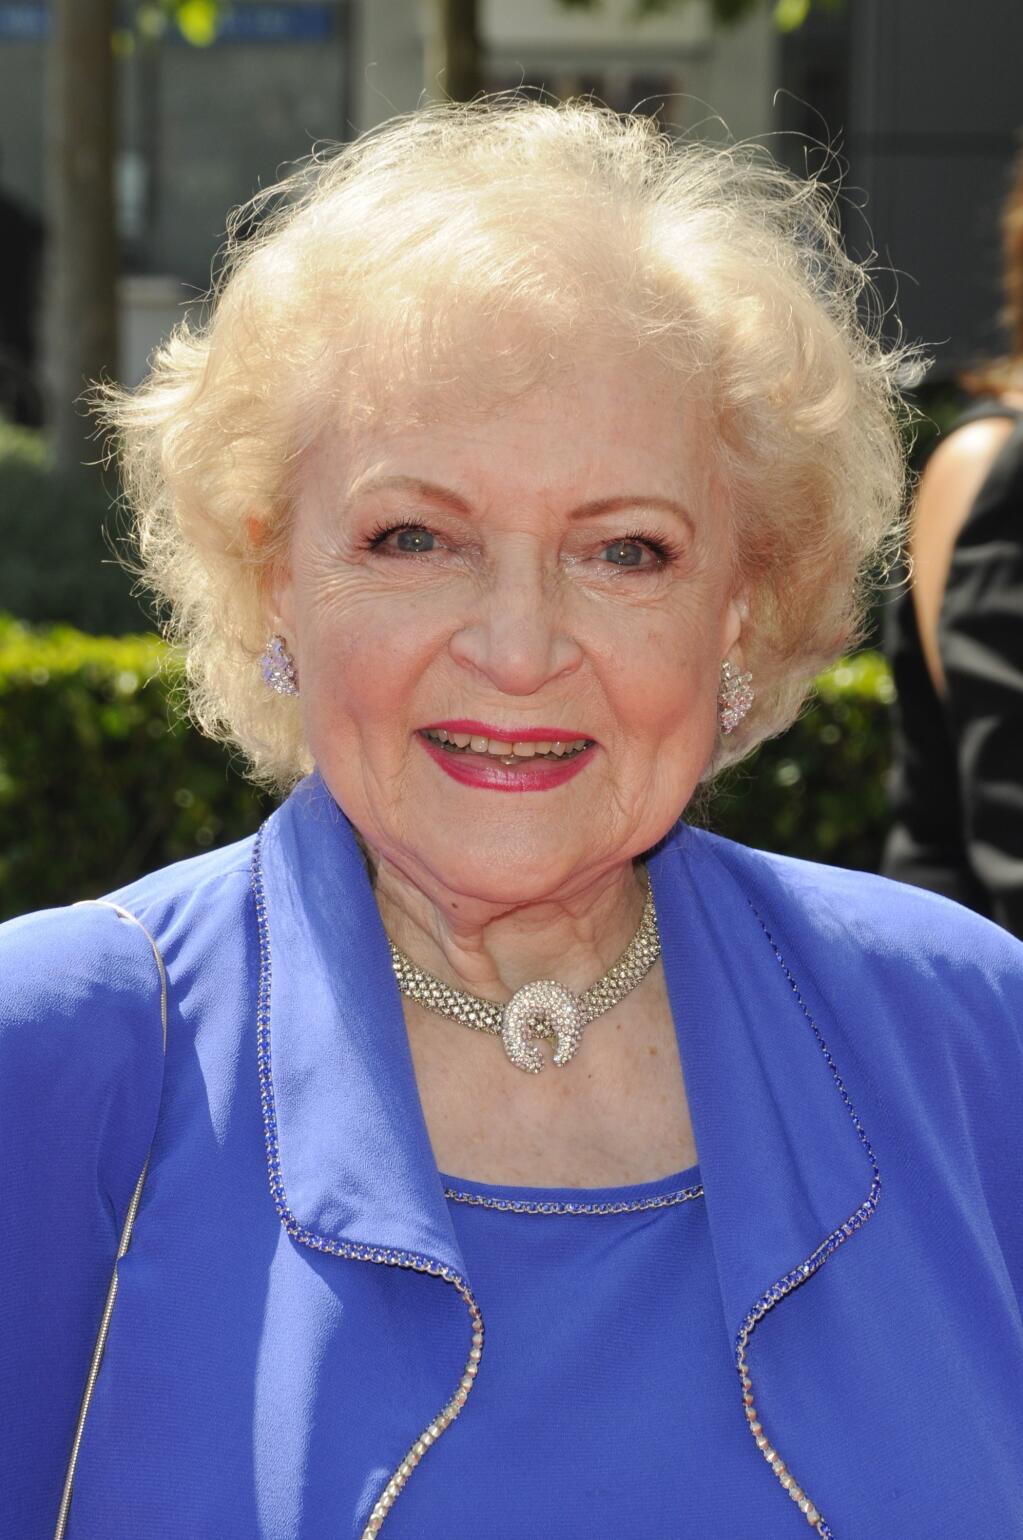 Betty White, shown here in 2009, celebrated her 99th birthday Jan. 17 with a hot dog and fries.